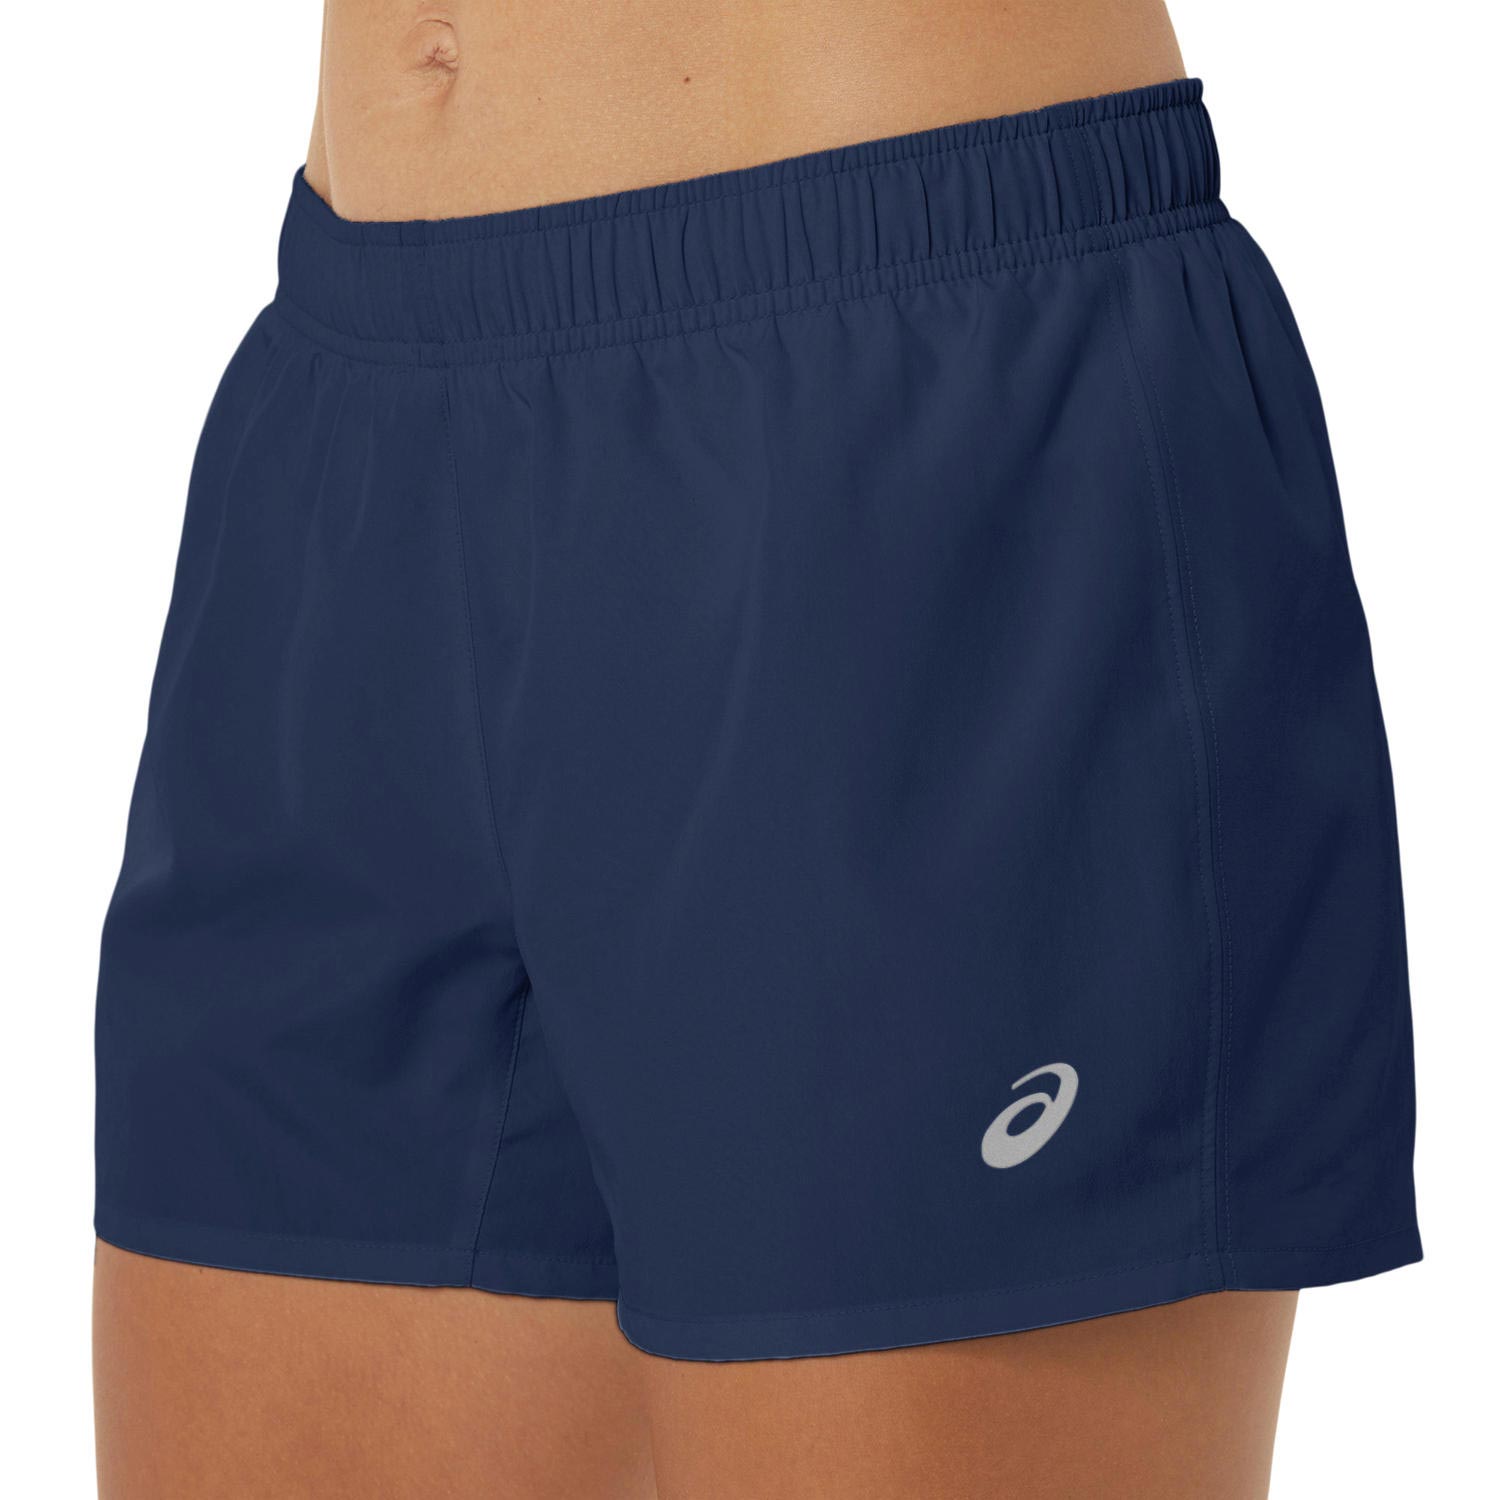 ASICS CORE 4IN1 WOMENS SHORTS